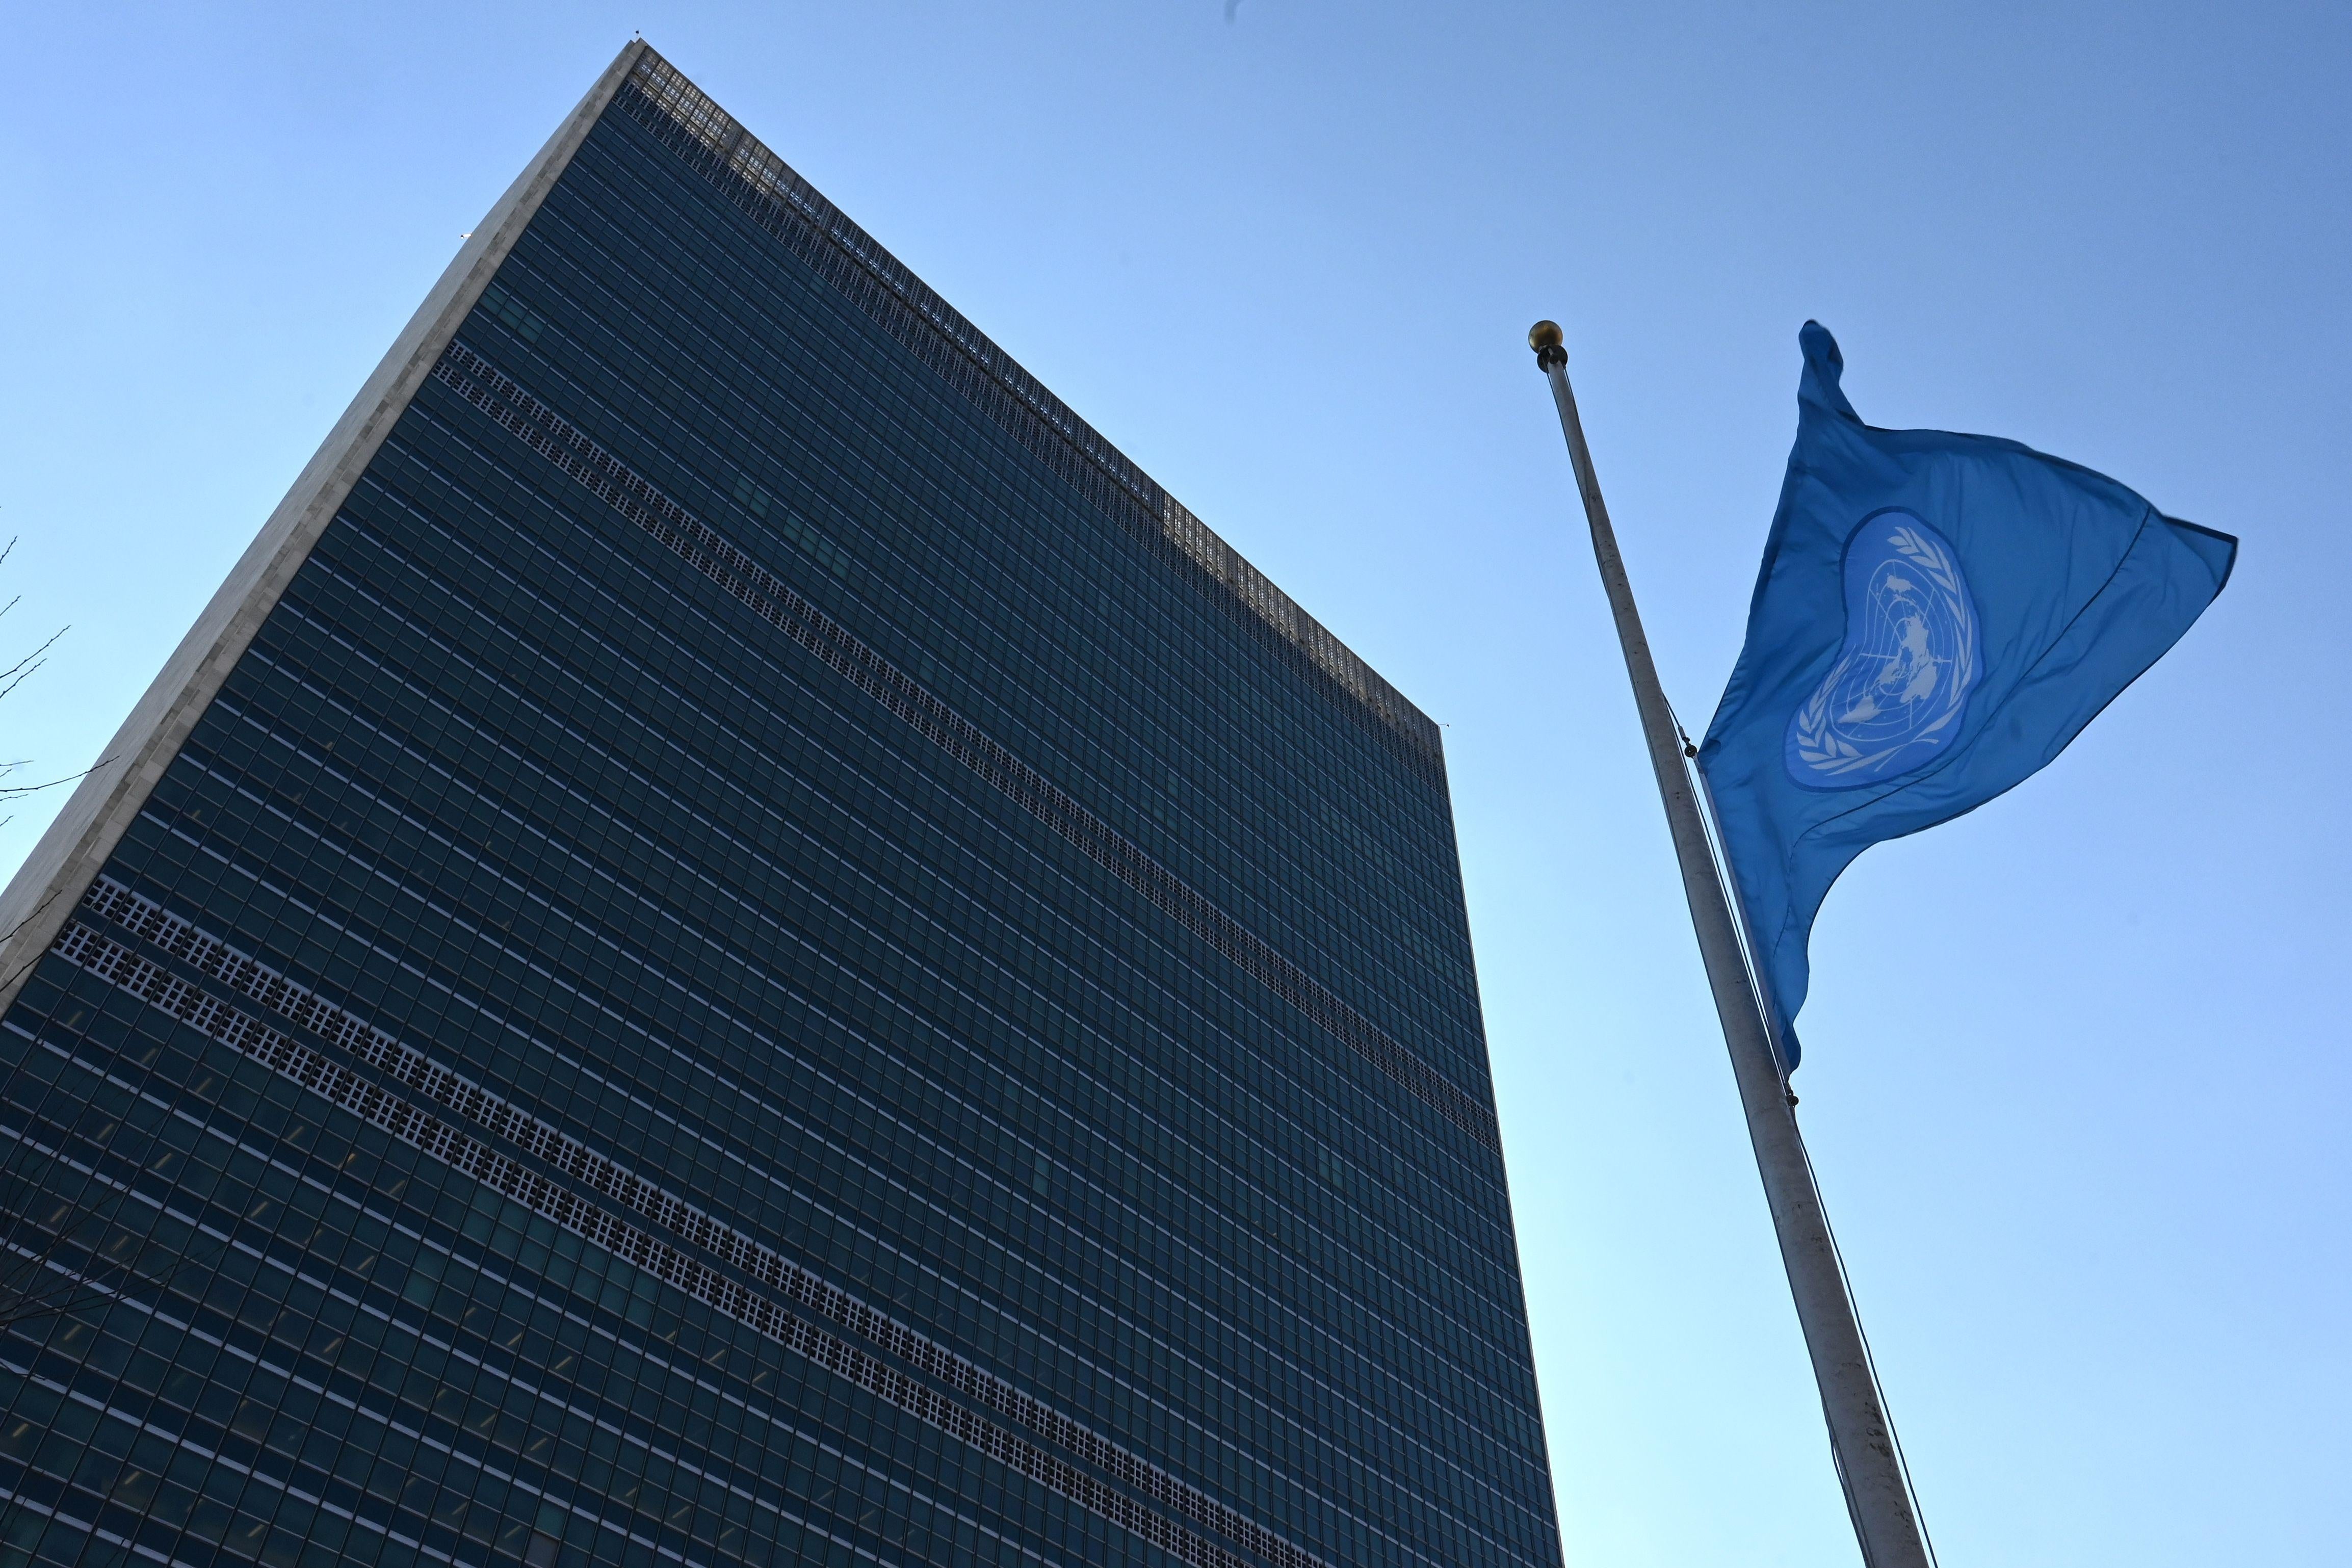 The flag of the United Nations is flown at half-mast in front of the Secretariat building.